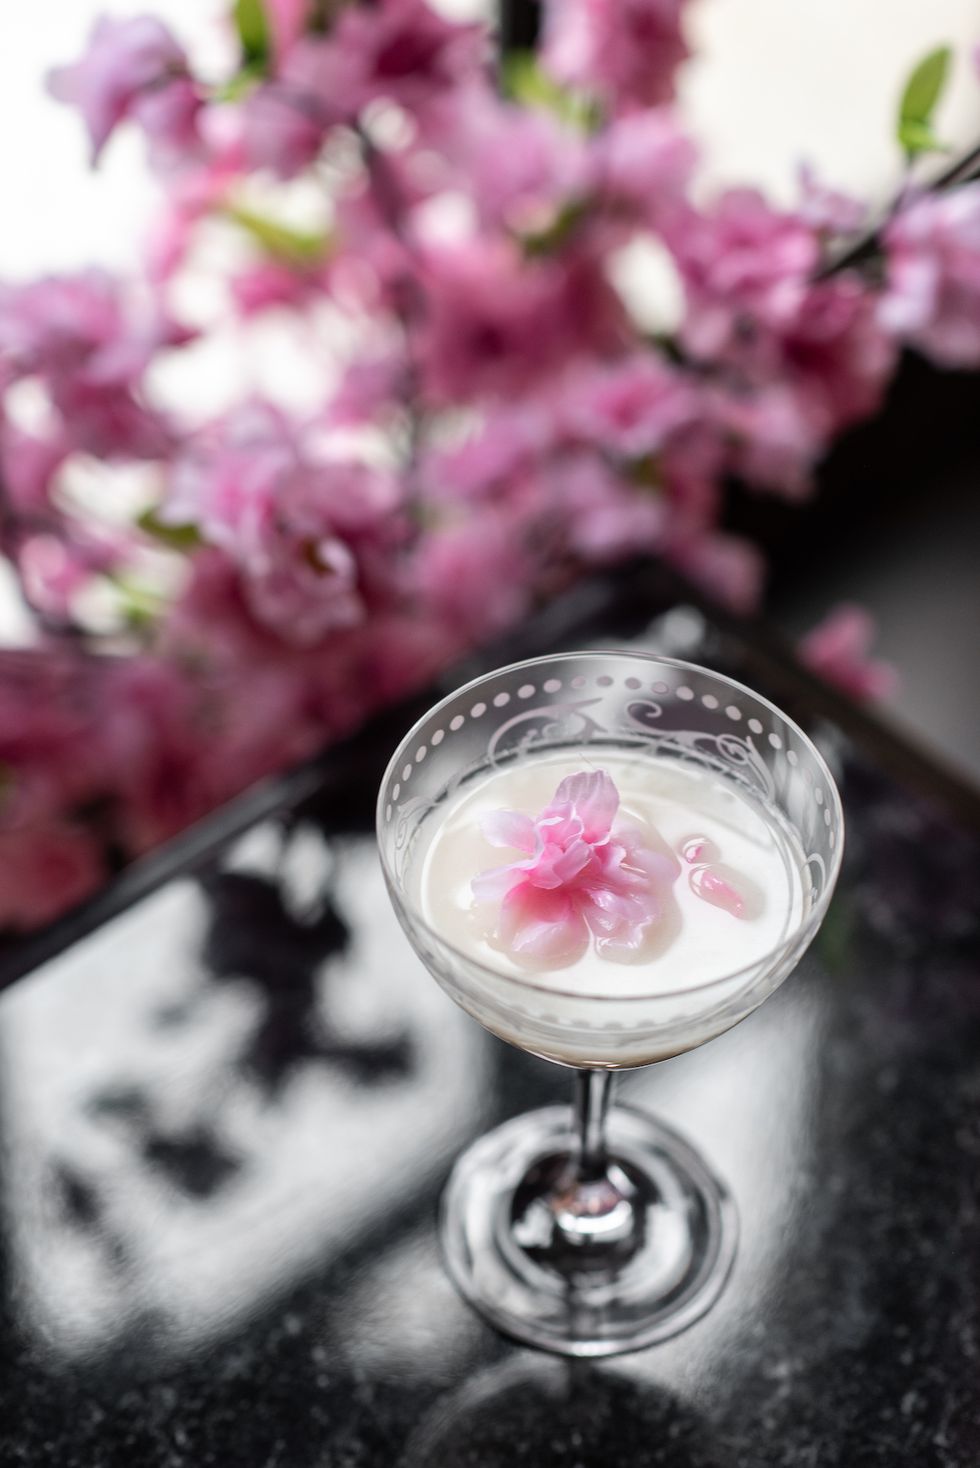 These flower-based liqueurs are a tasty way to celebrate spring